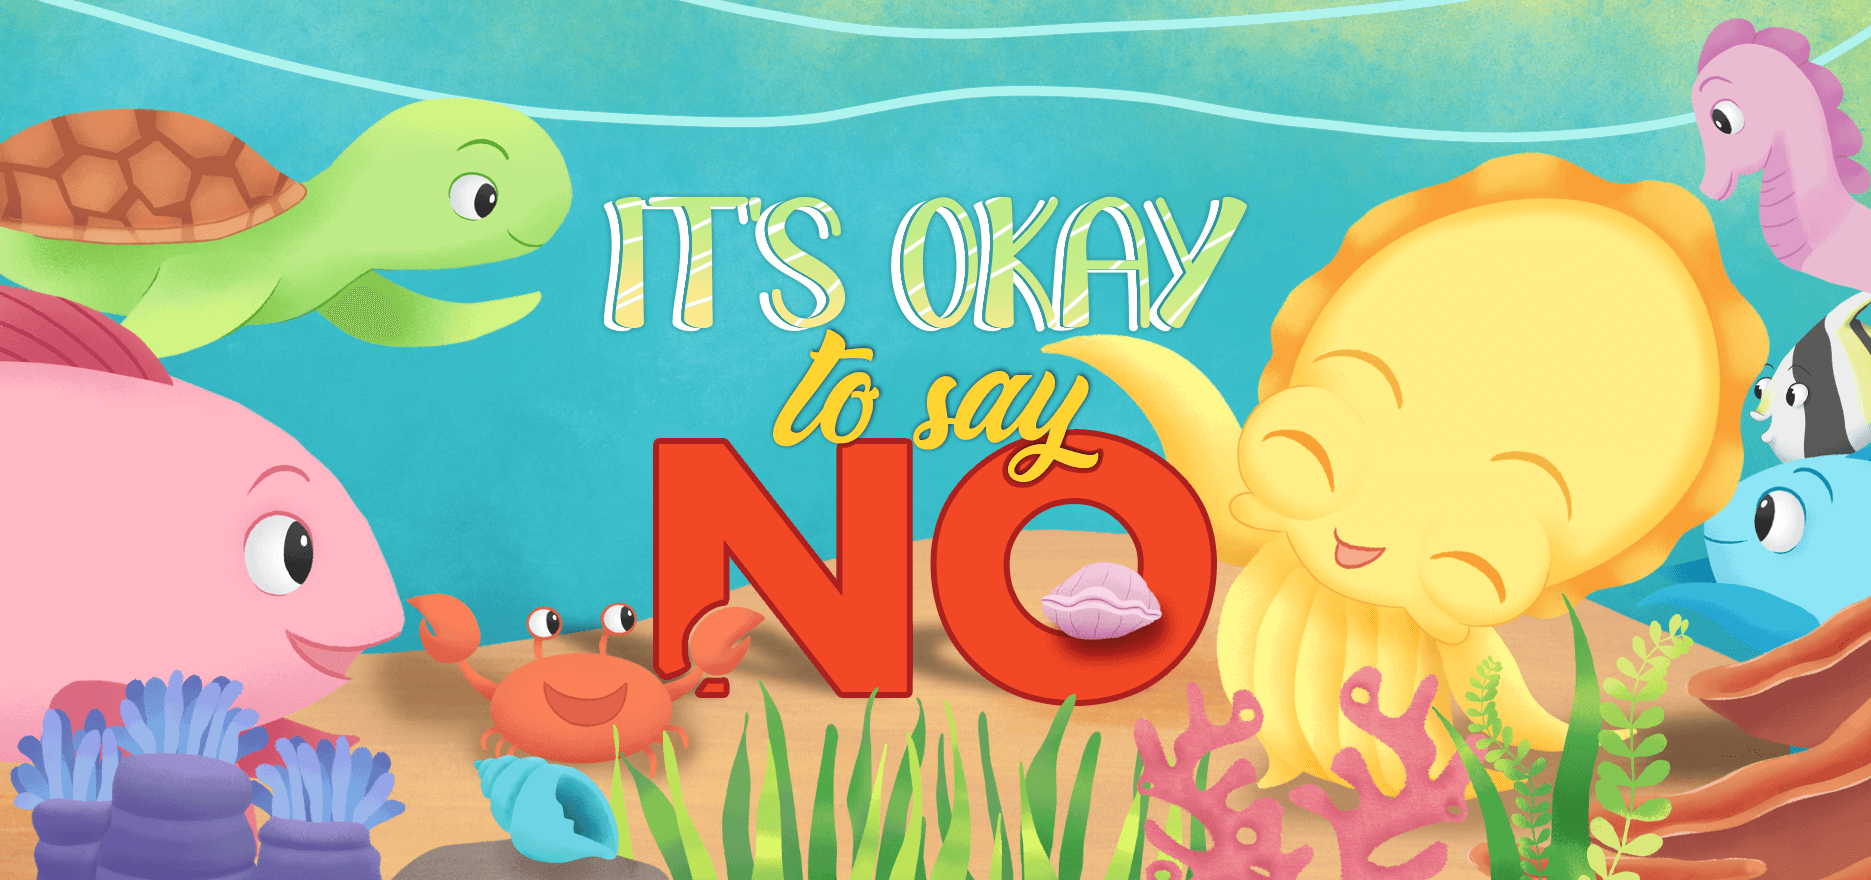 Zoy: Children’s Books App -  "It's Ok To Say No" Teaser